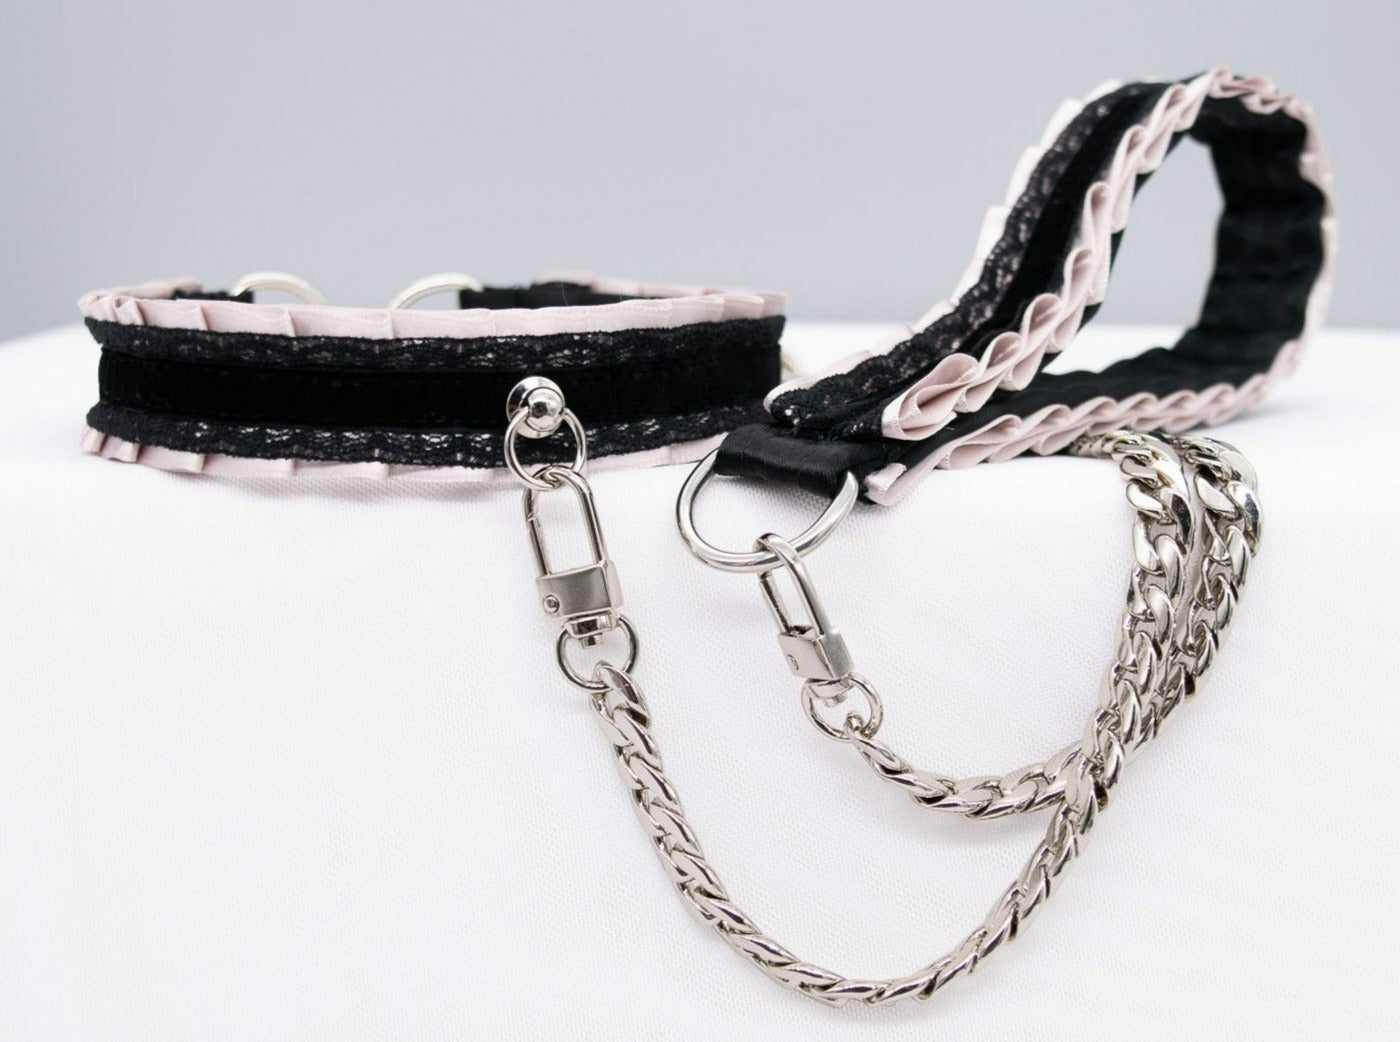 Dusty Lilac and Black Velvet Collar and Leash BDSM Set